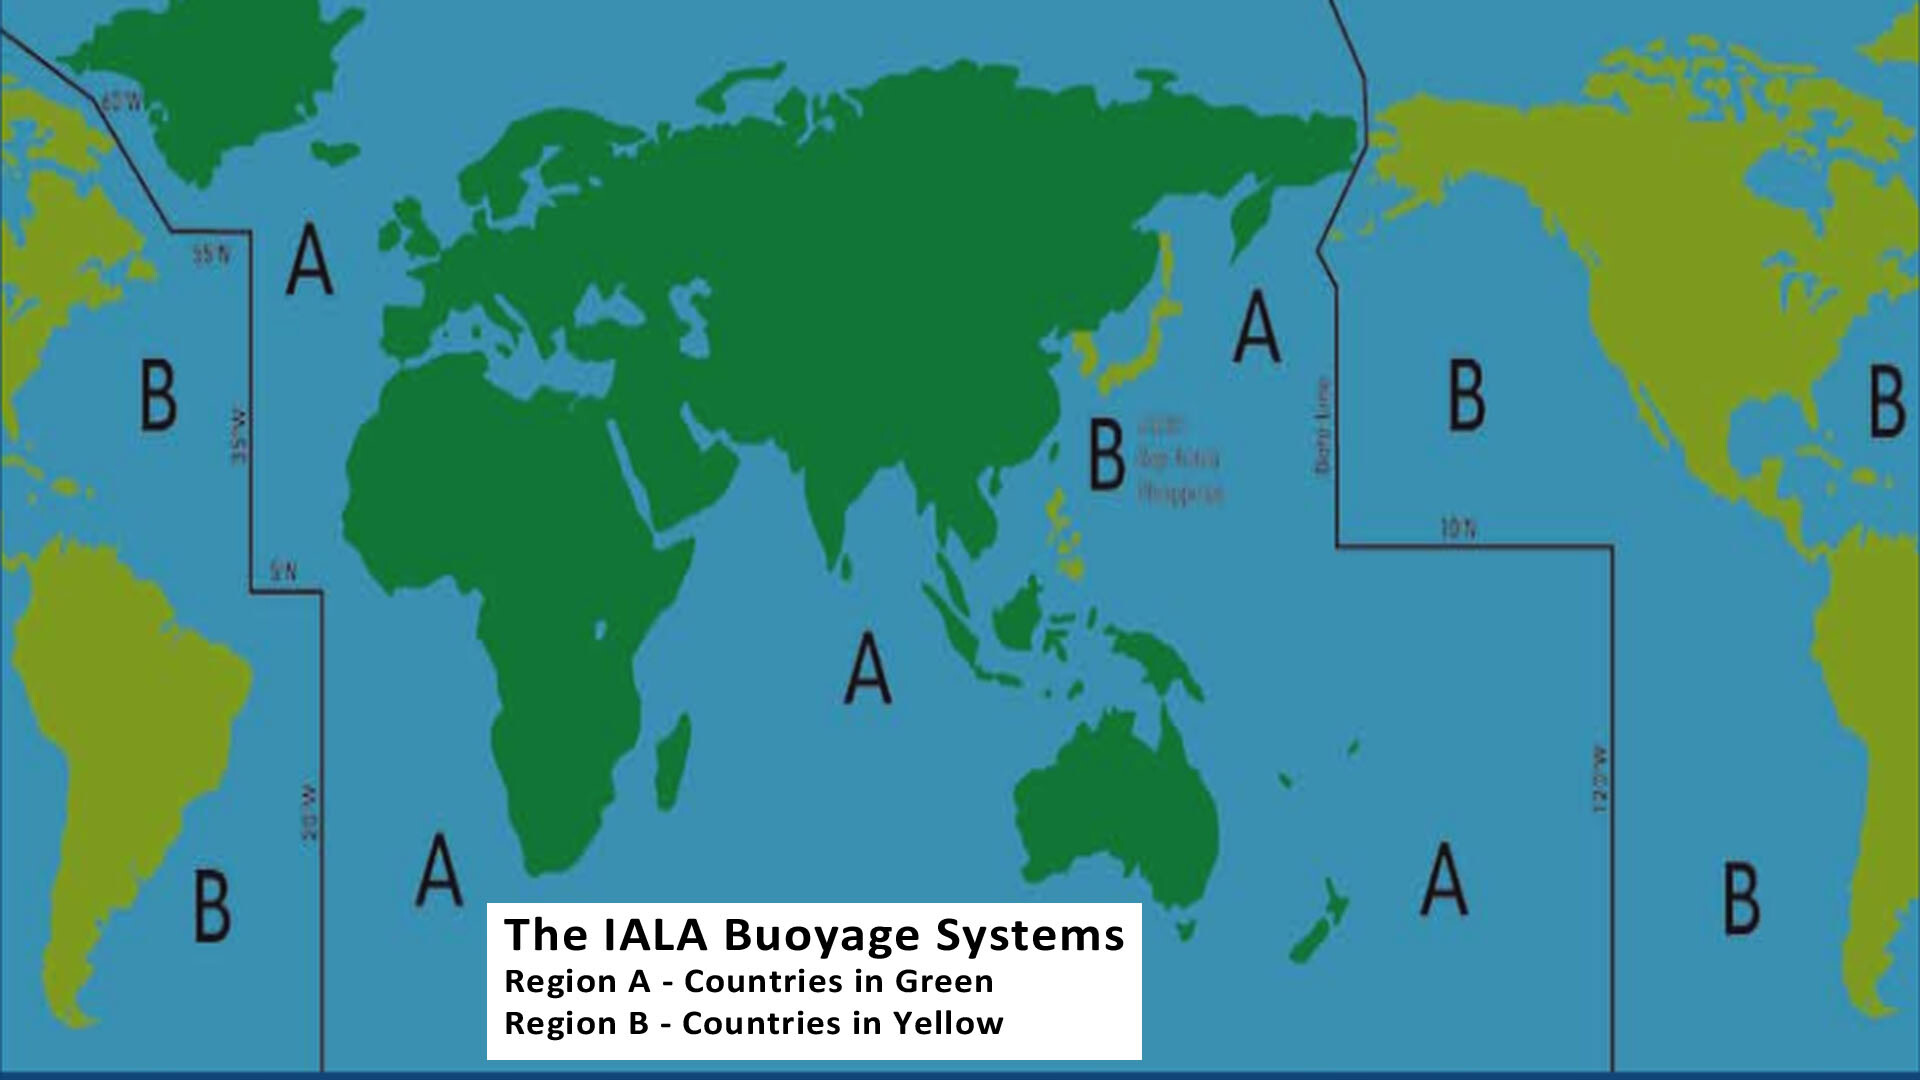 A map of the world showing which countries are using the The IALA Buoyage Systems A and B.